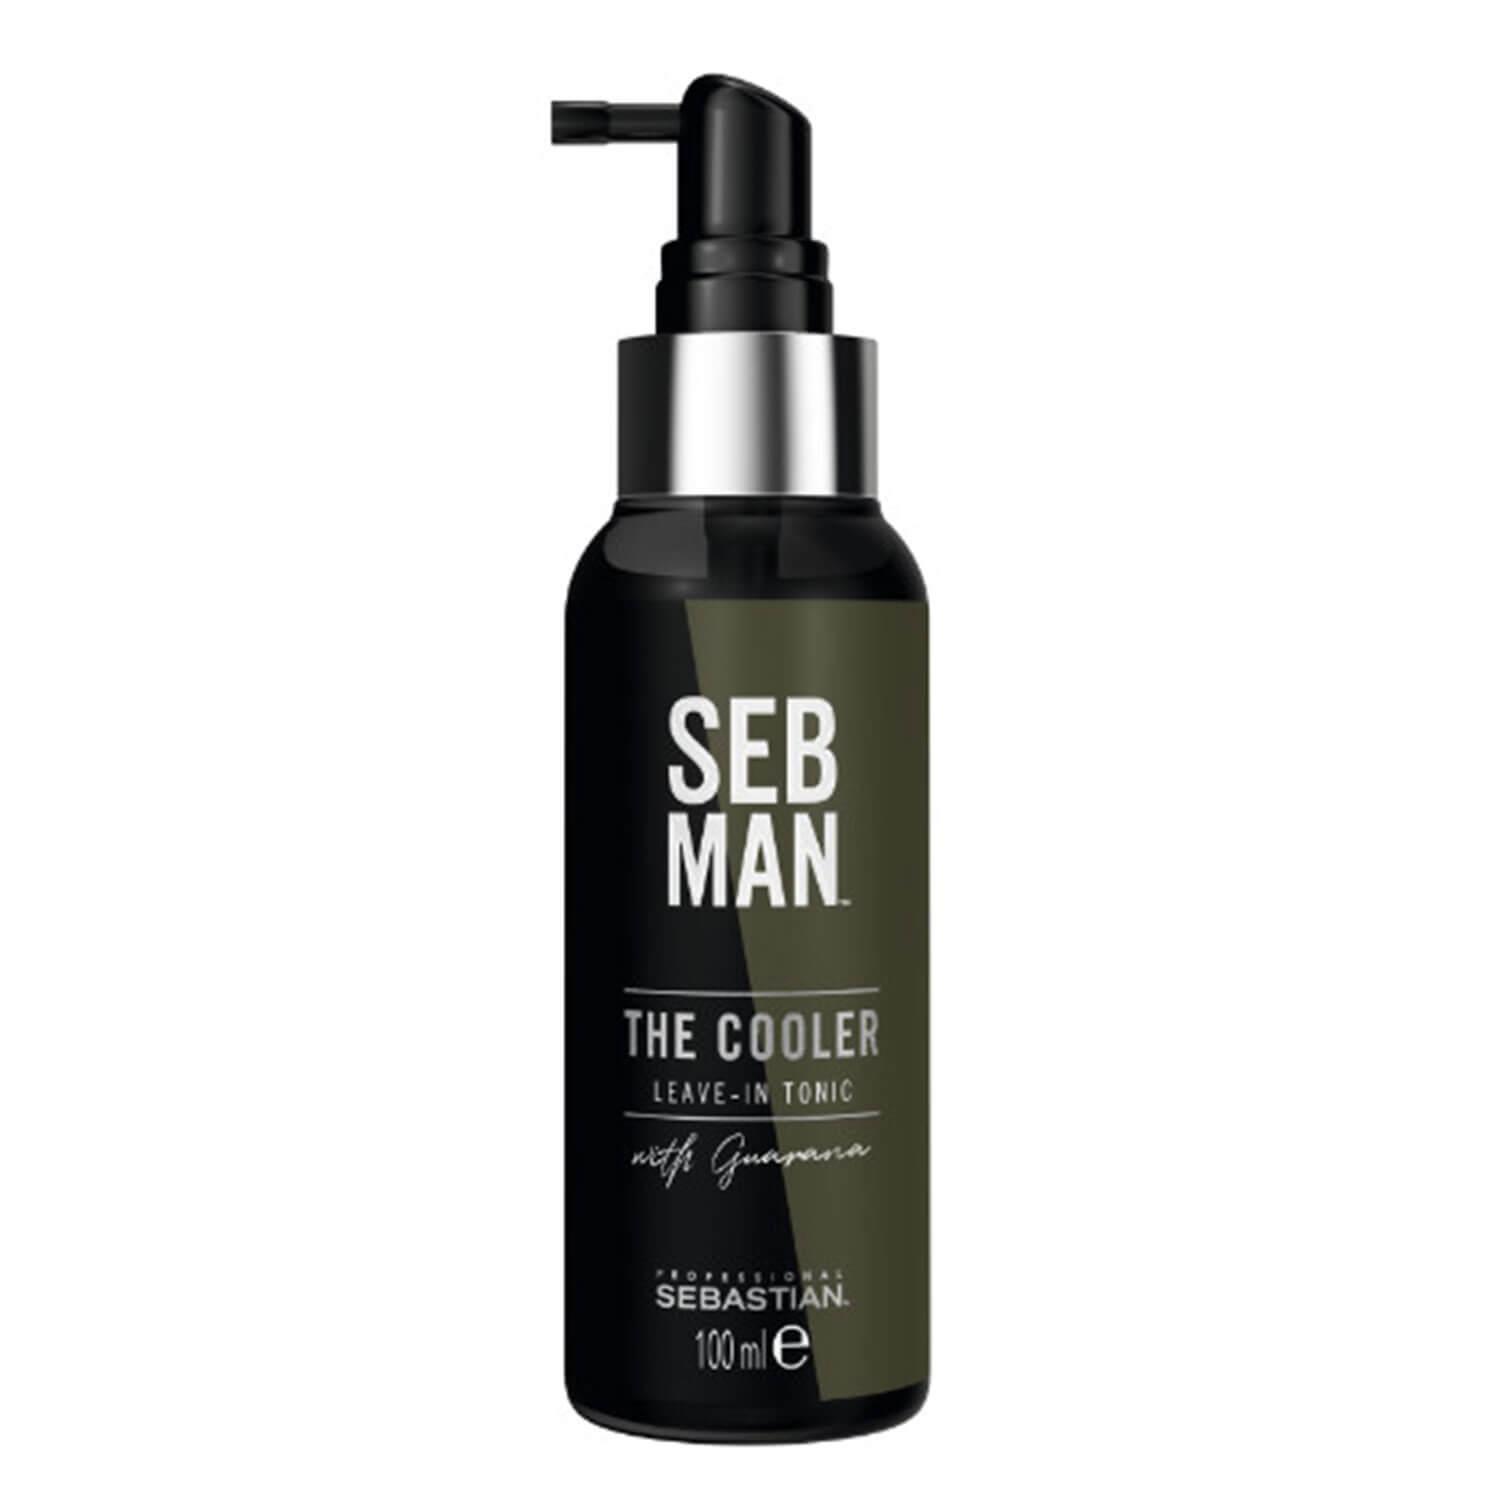 SEB MAN - The Cooler Refreshing Leave-In Tonic